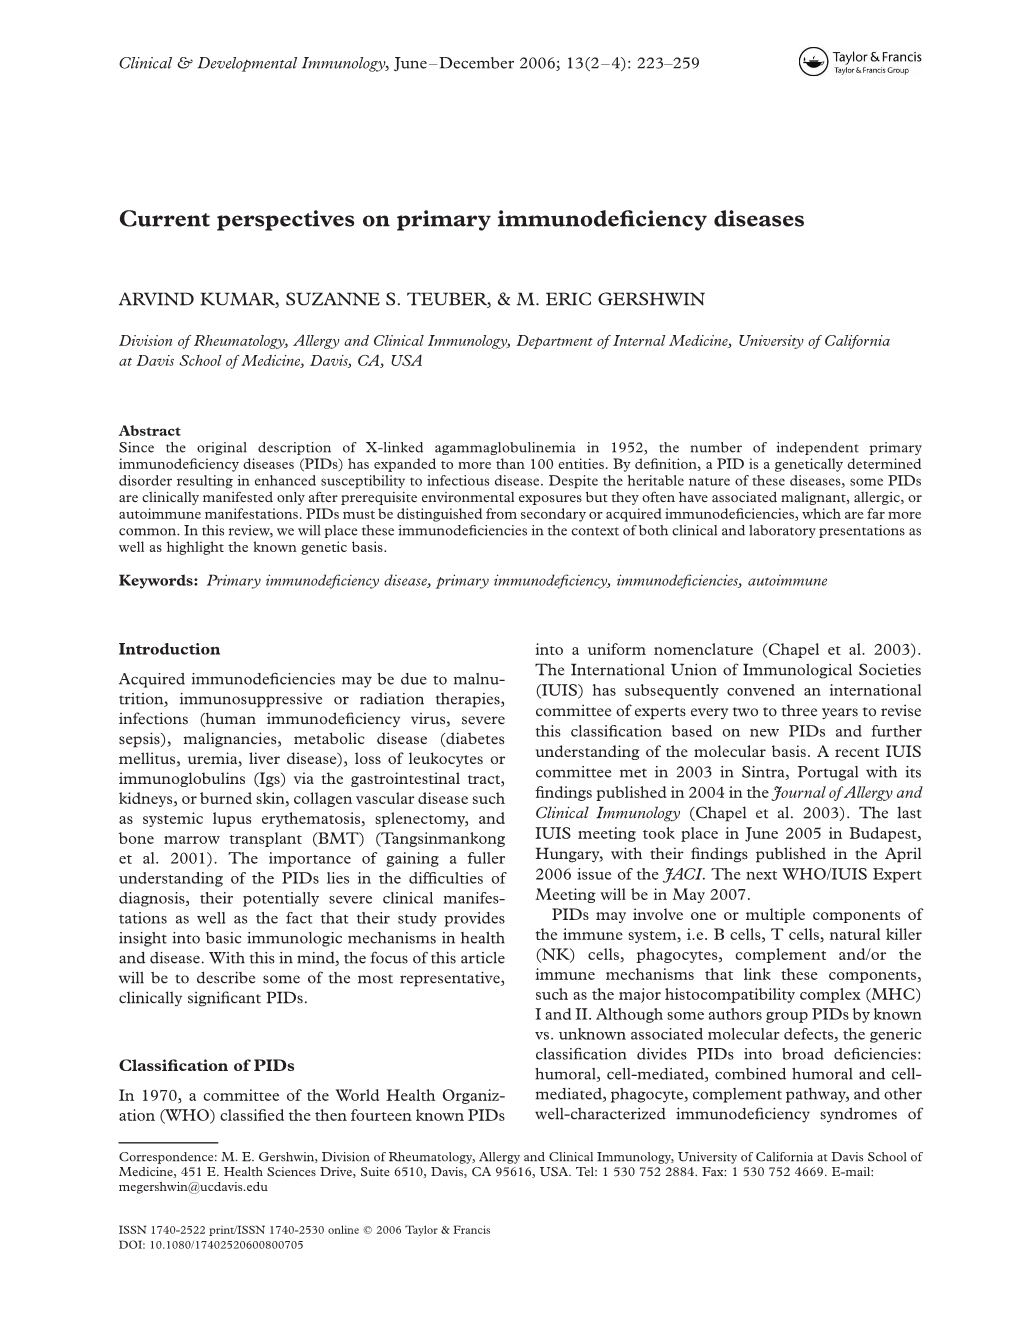 Current Perspectives on Primary Immunodeficiency Diseases